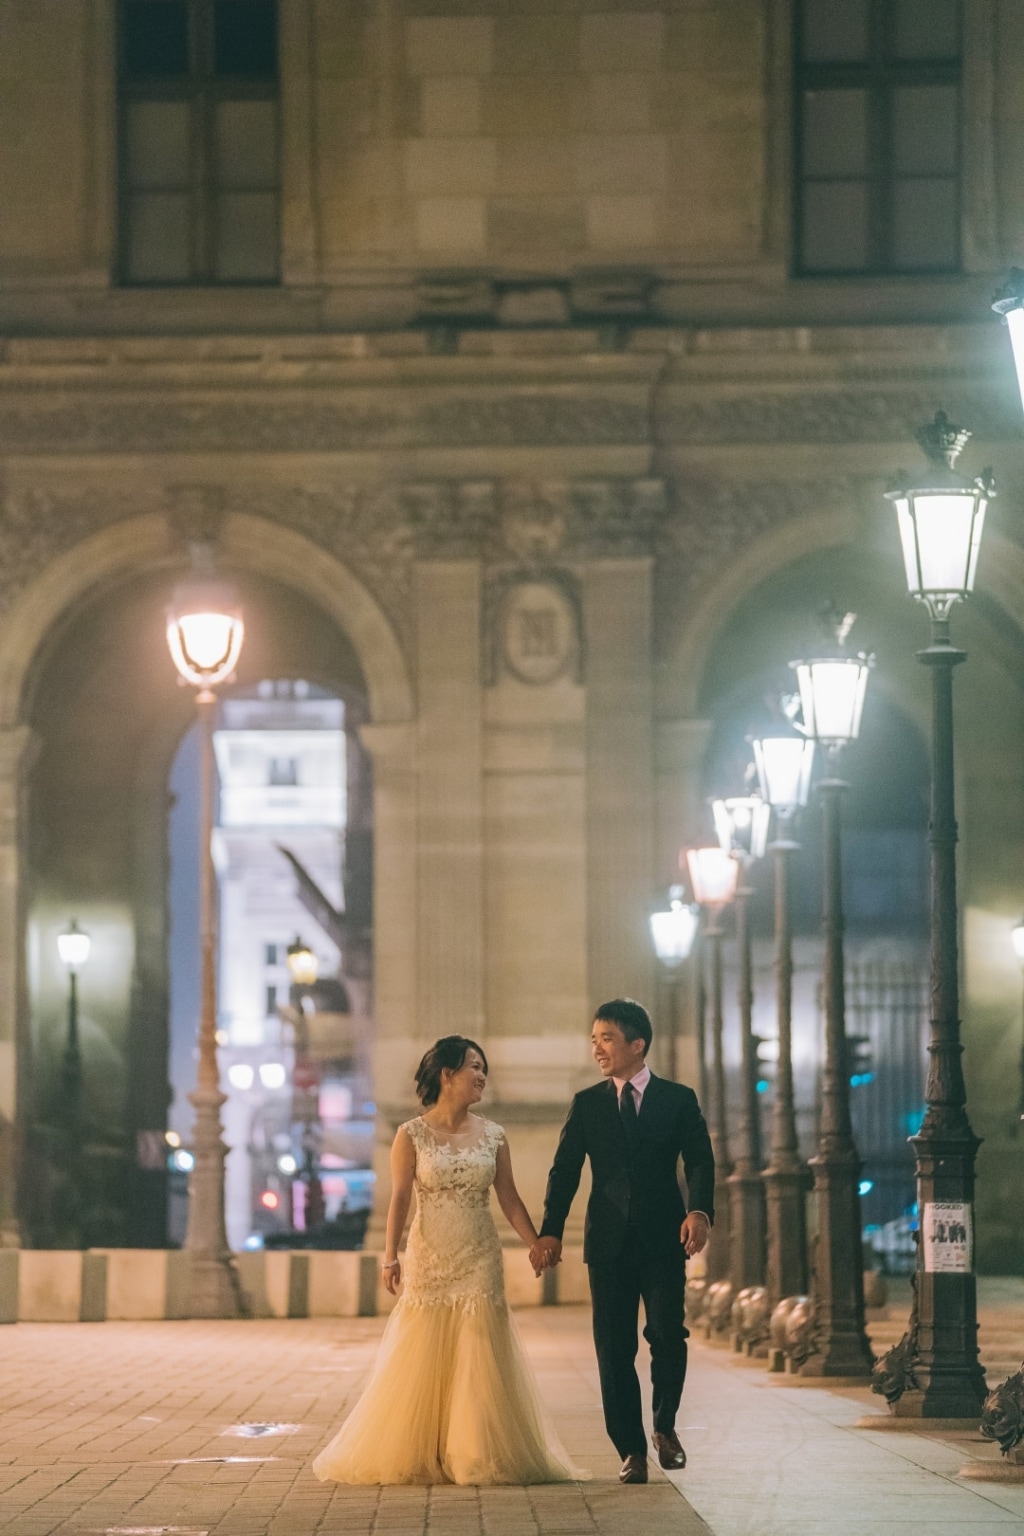 Paris Pre-wedding Photos At Chateau de Sceaux, Eiffel Tower, Louvre Night Shoot by Son on OneThreeOneFour 60